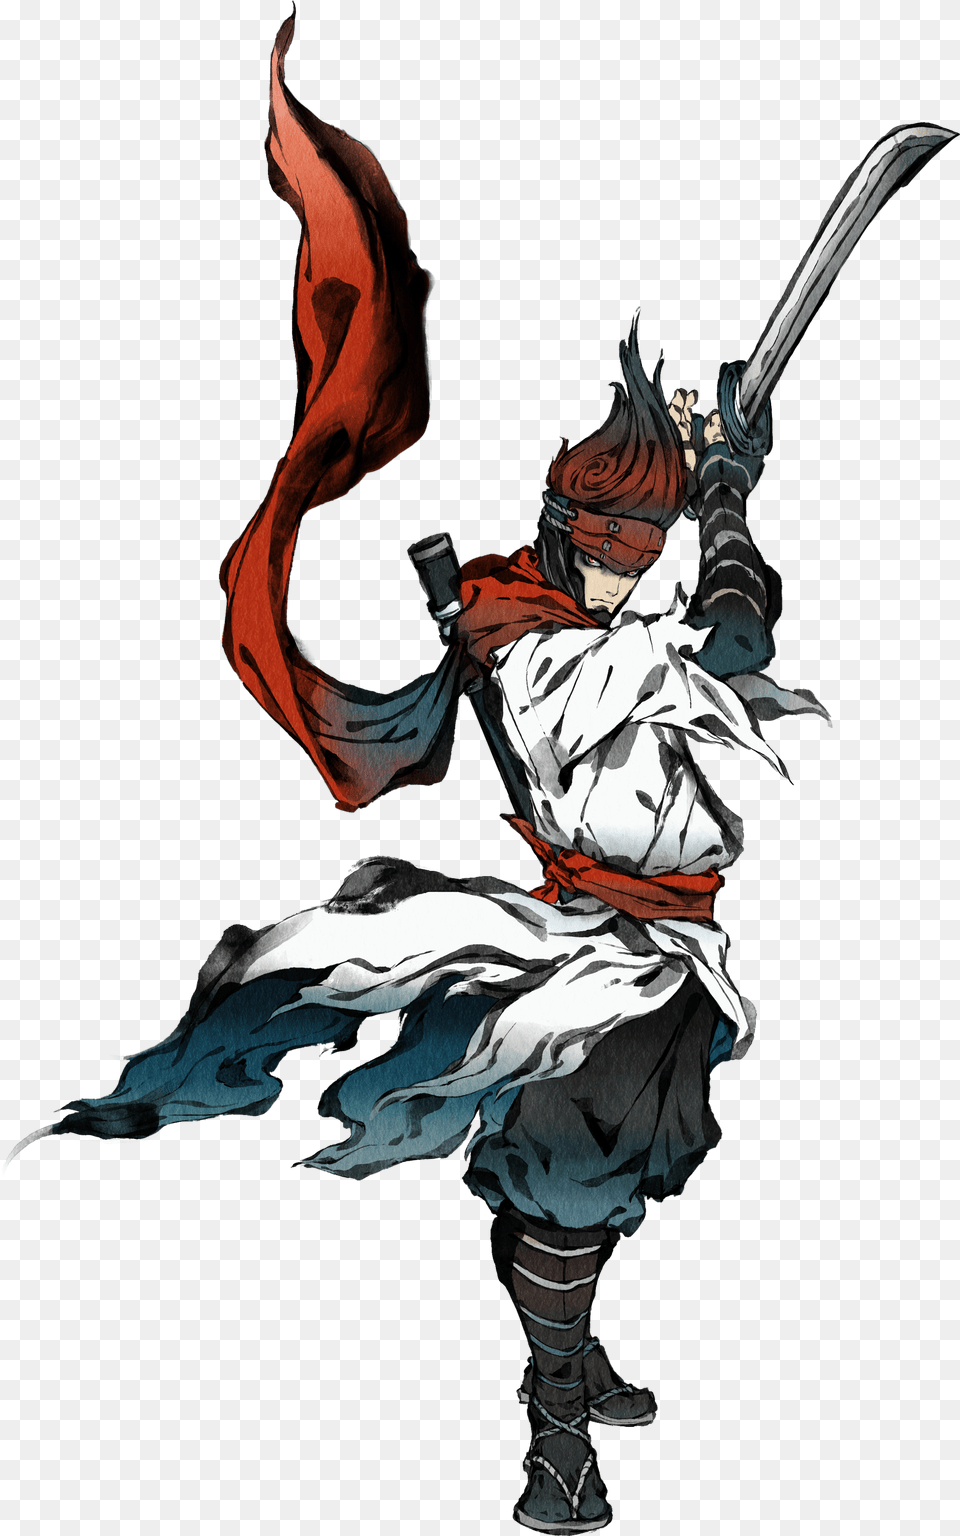 After The Oni Killed His Parents Onimaru Was Kidnapped Ykai Demons Concept Art, Symbol, Sign Png